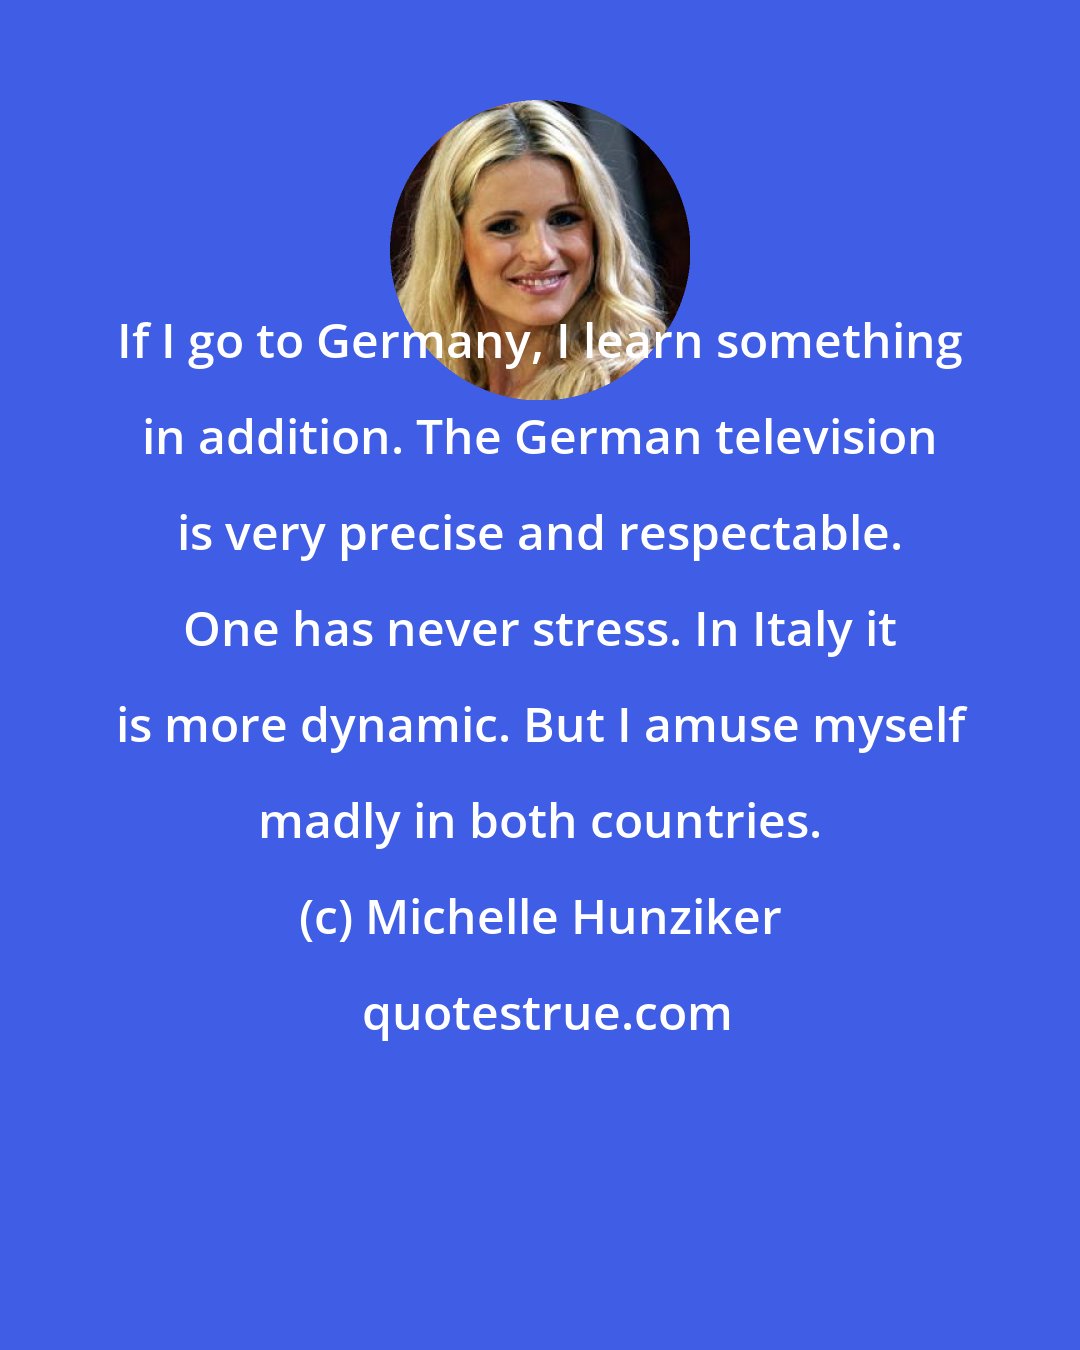 Michelle Hunziker: If I go to Germany, I learn something in addition. The German television is very precise and respectable. One has never stress. In Italy it is more dynamic. But I amuse myself madly in both countries.